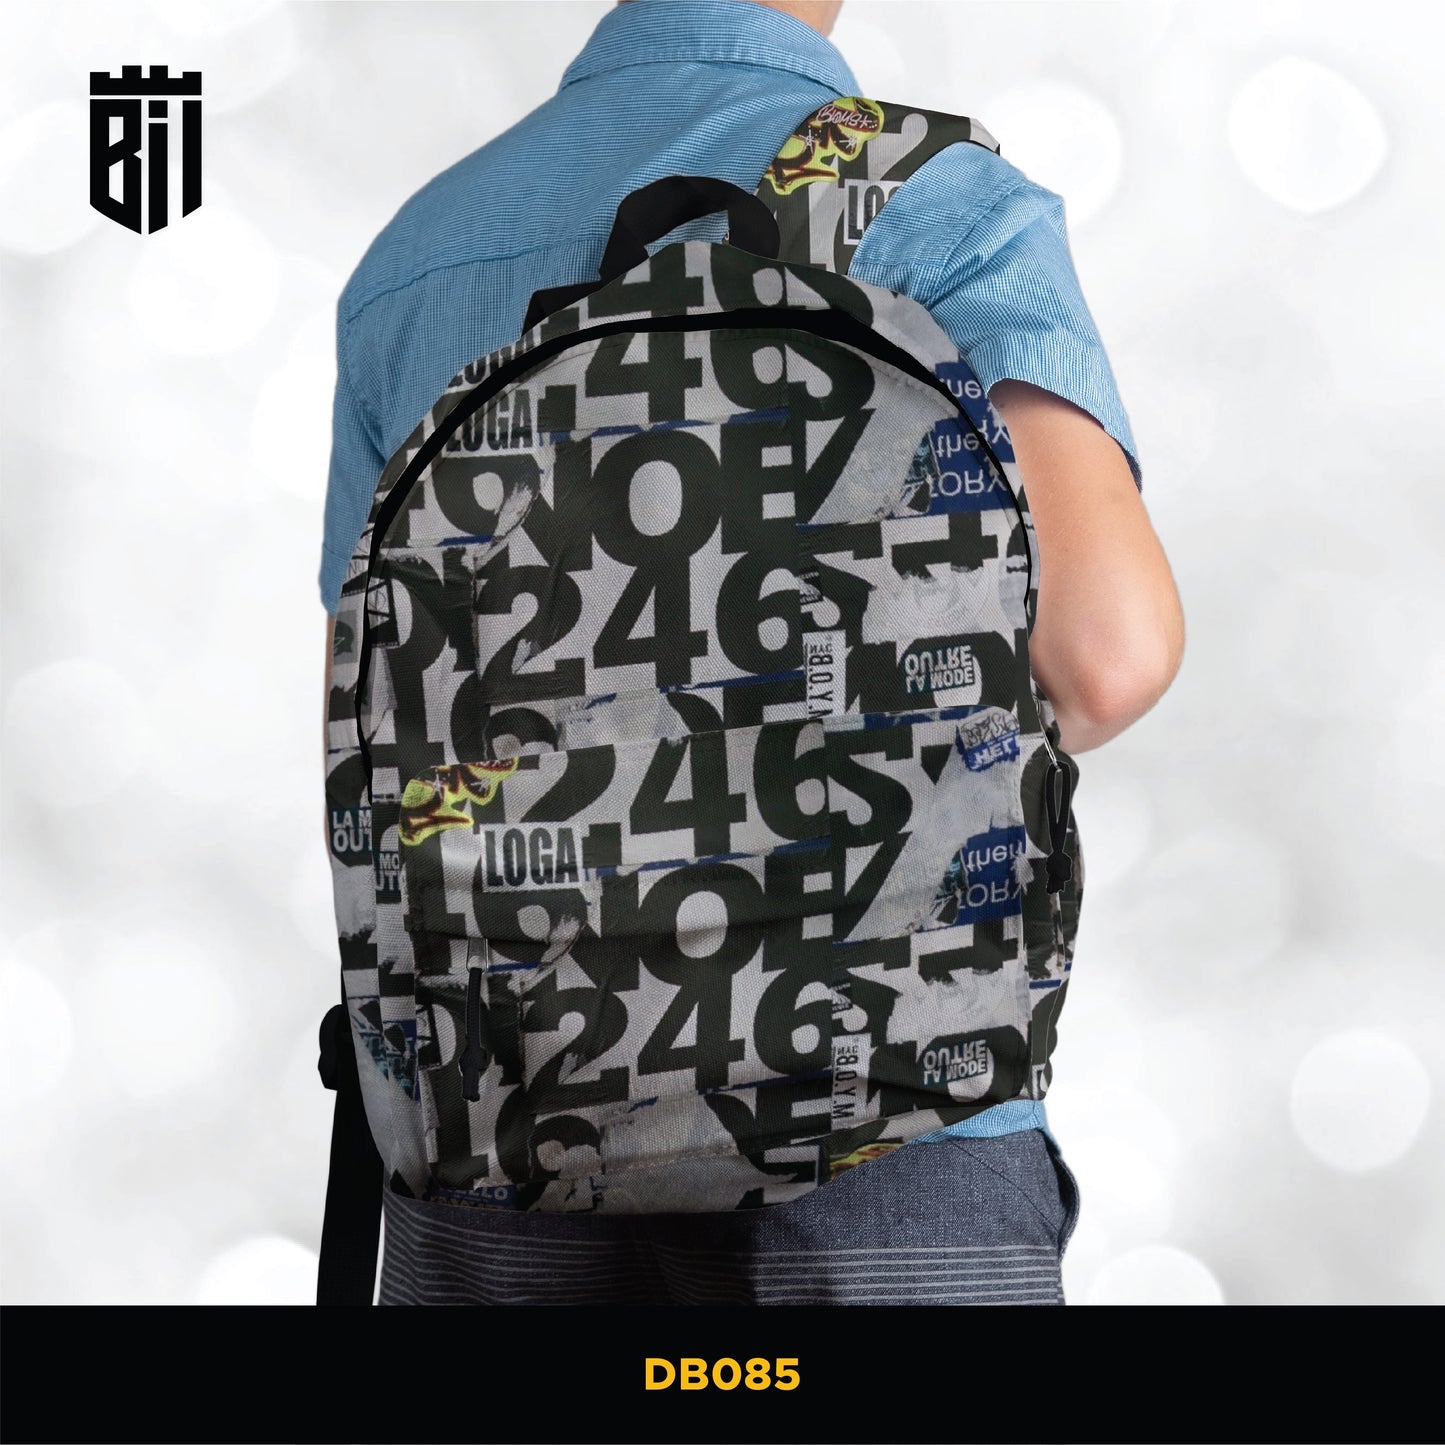 DB085 Typography Art Allover Printed Backpack